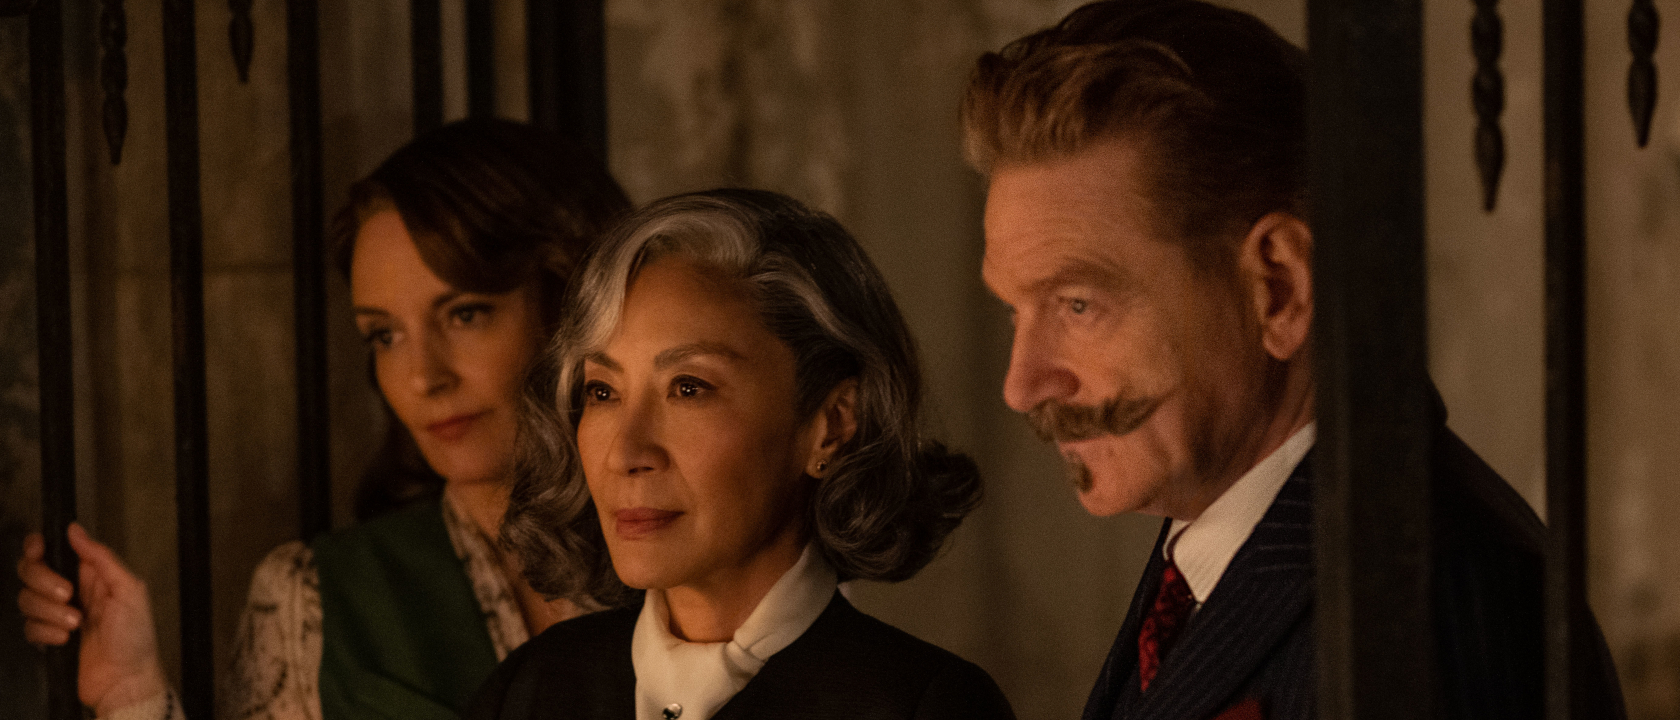 Tina Fey, Michelle Yeoh, and Kenneth Branagh entering a room together in A Haunting in Venice's palazzo.